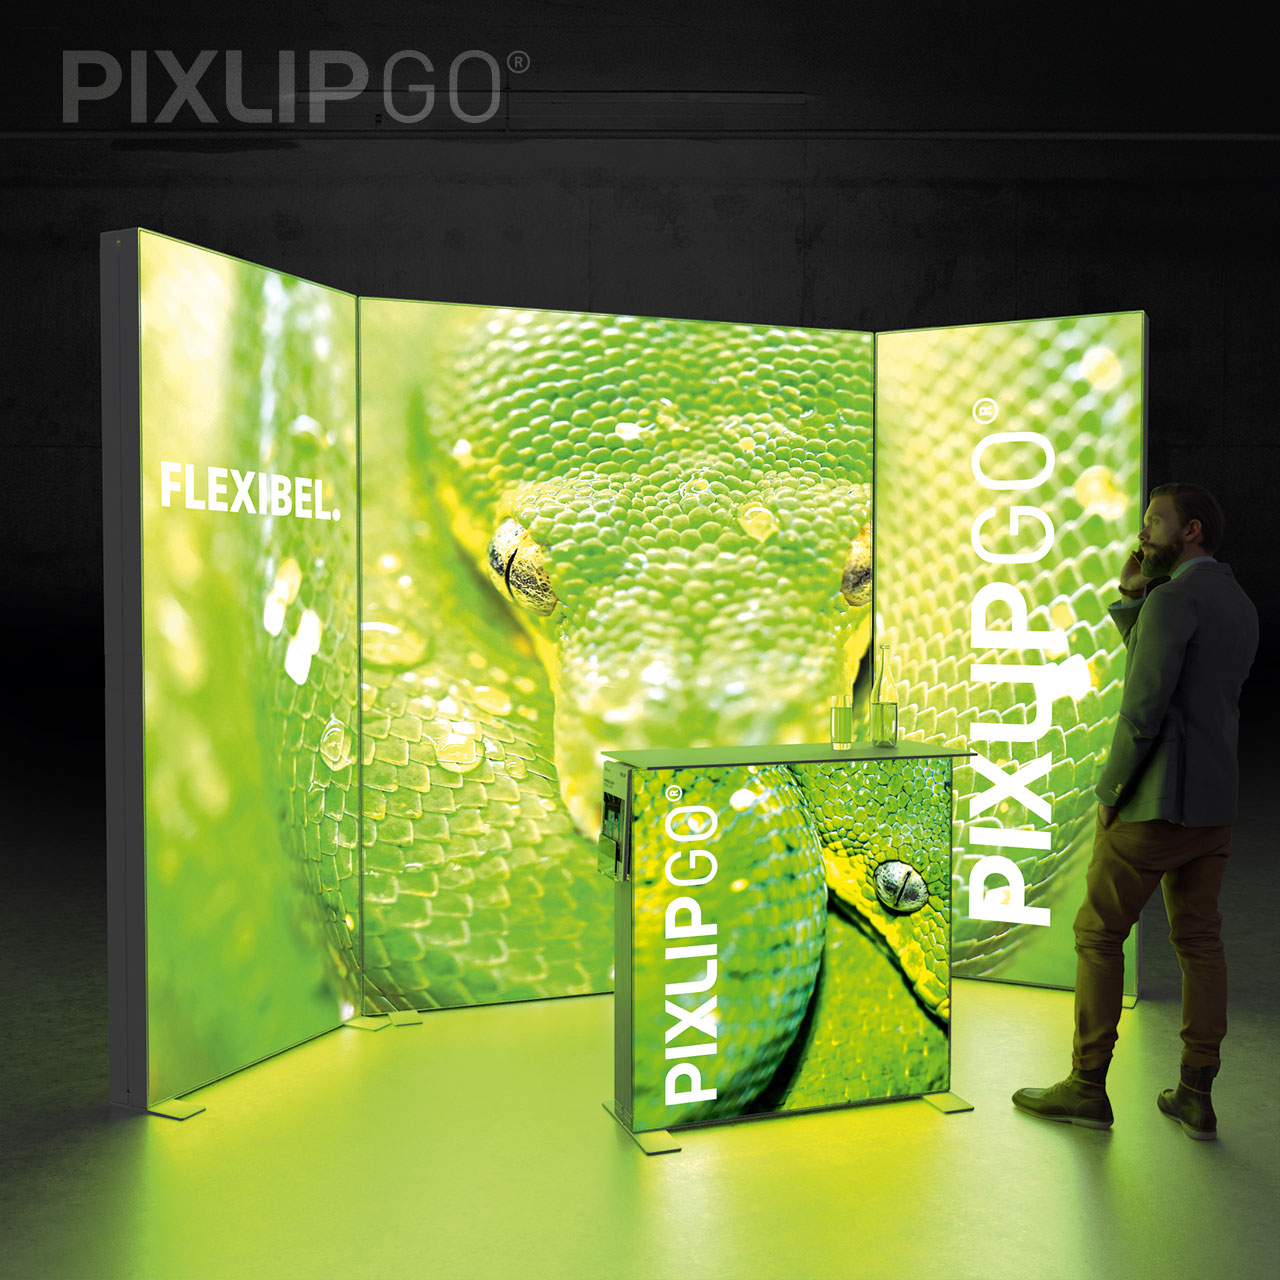 LED Messestand Pixlip GO STAND RL3010